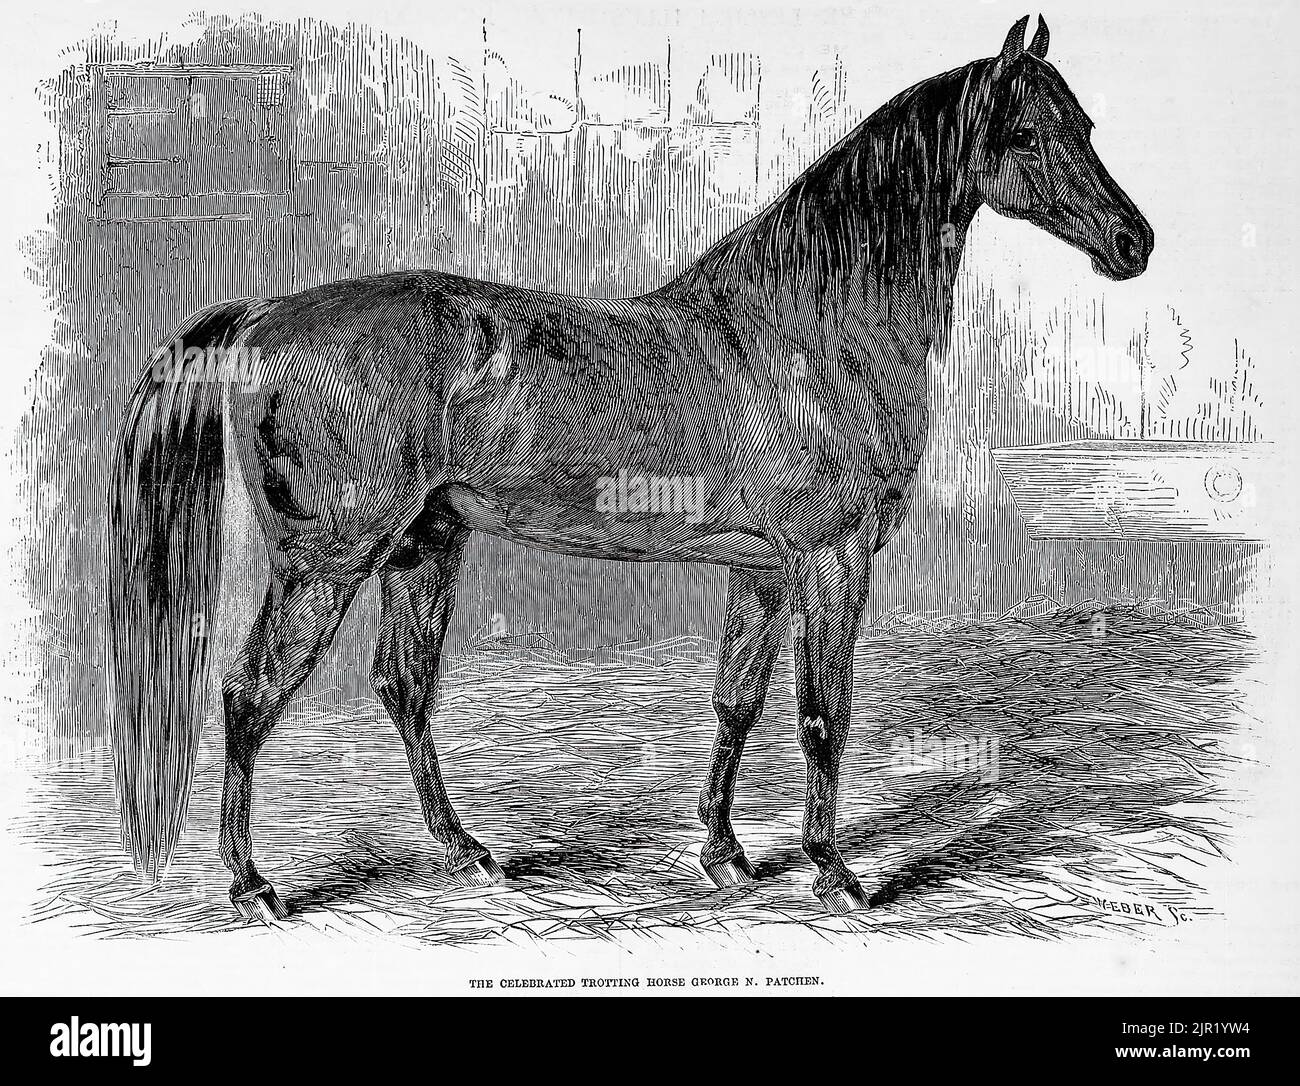 The celebrated trotting horse George N. Patchen (1860). 19th century illustration from Frank Leslie's Illustrated Newspaper Stock Photo